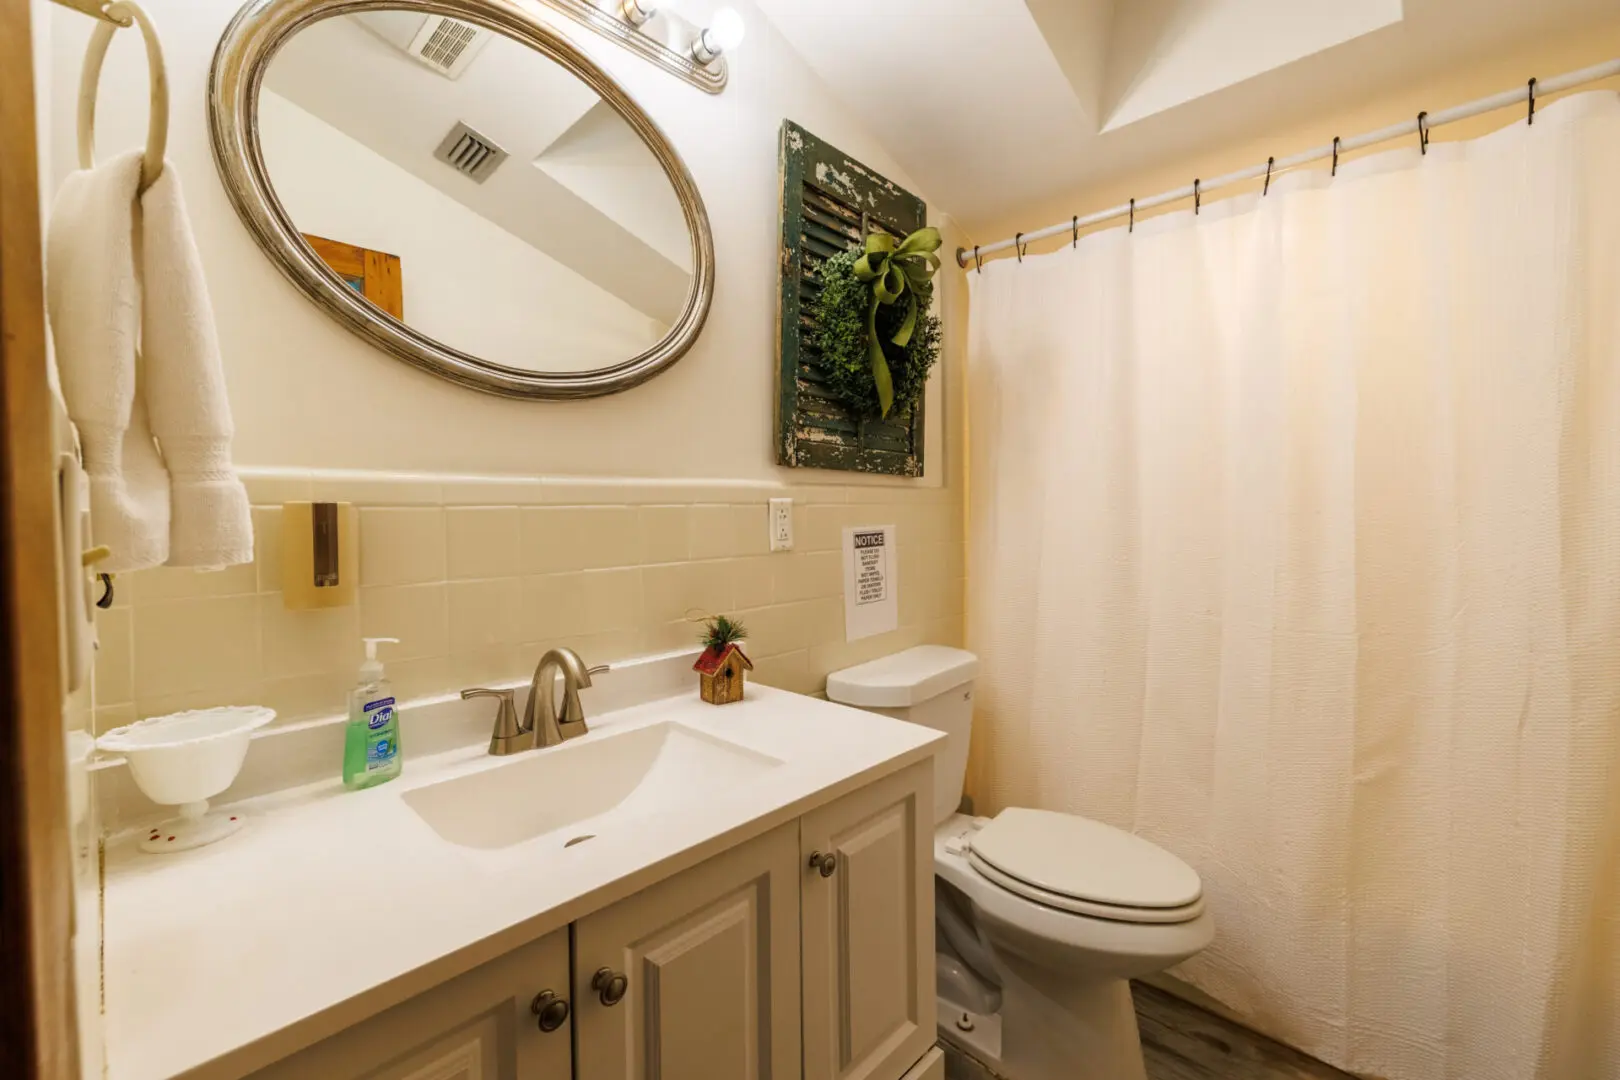 A vacation bathroom with a sink, toilet, and shower curtain.